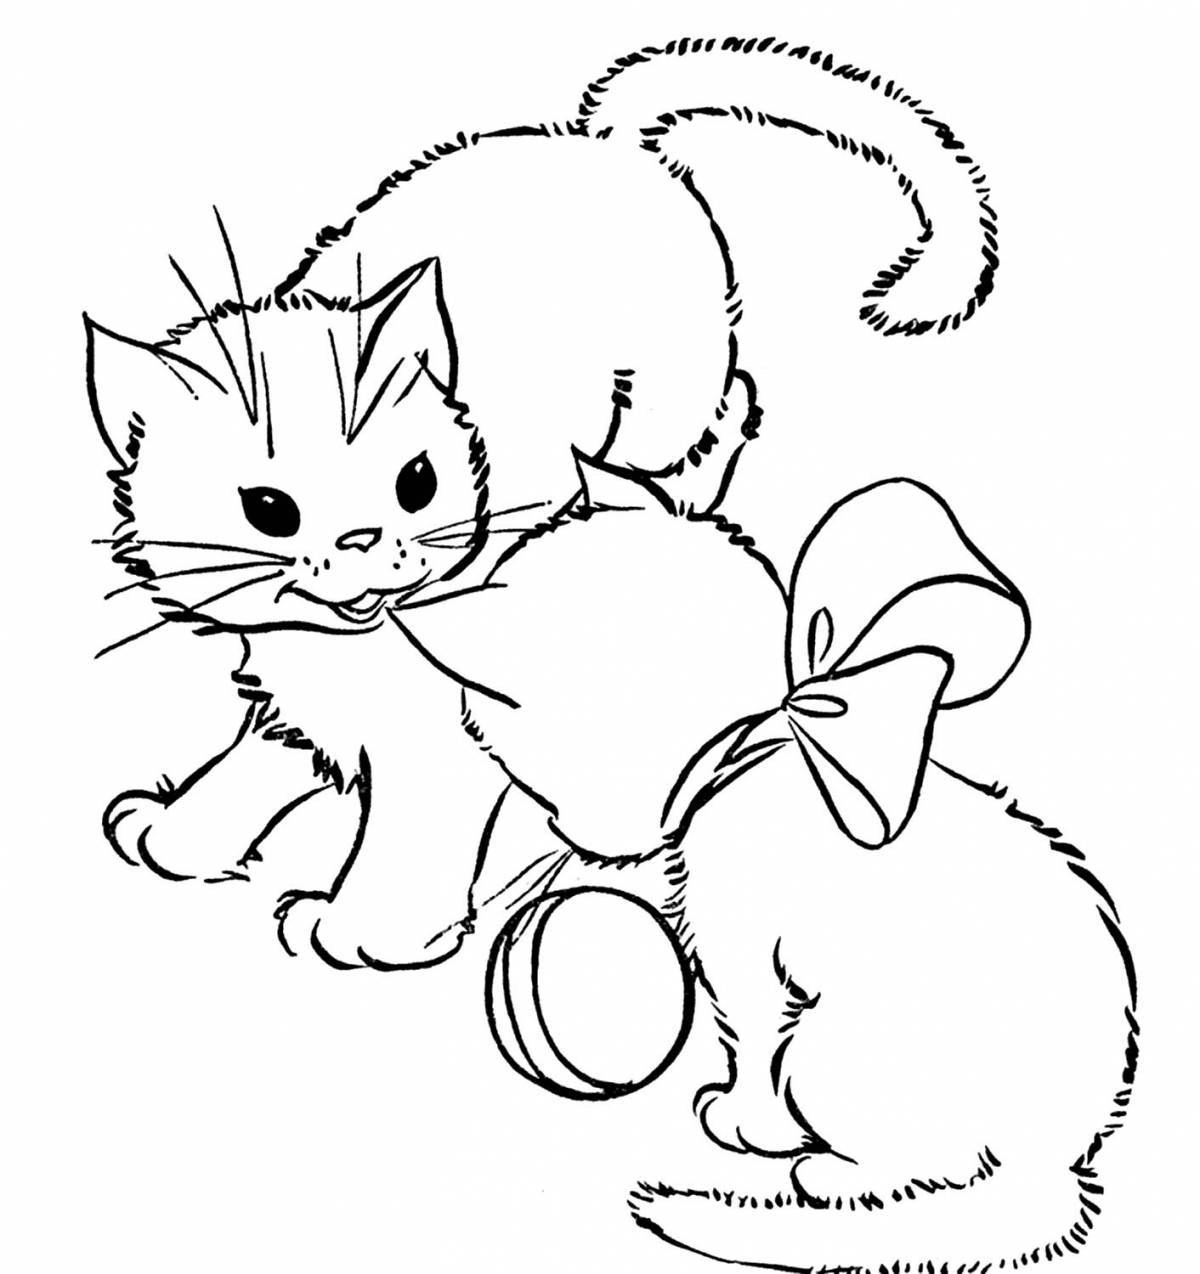 Adorable kitten coloring page